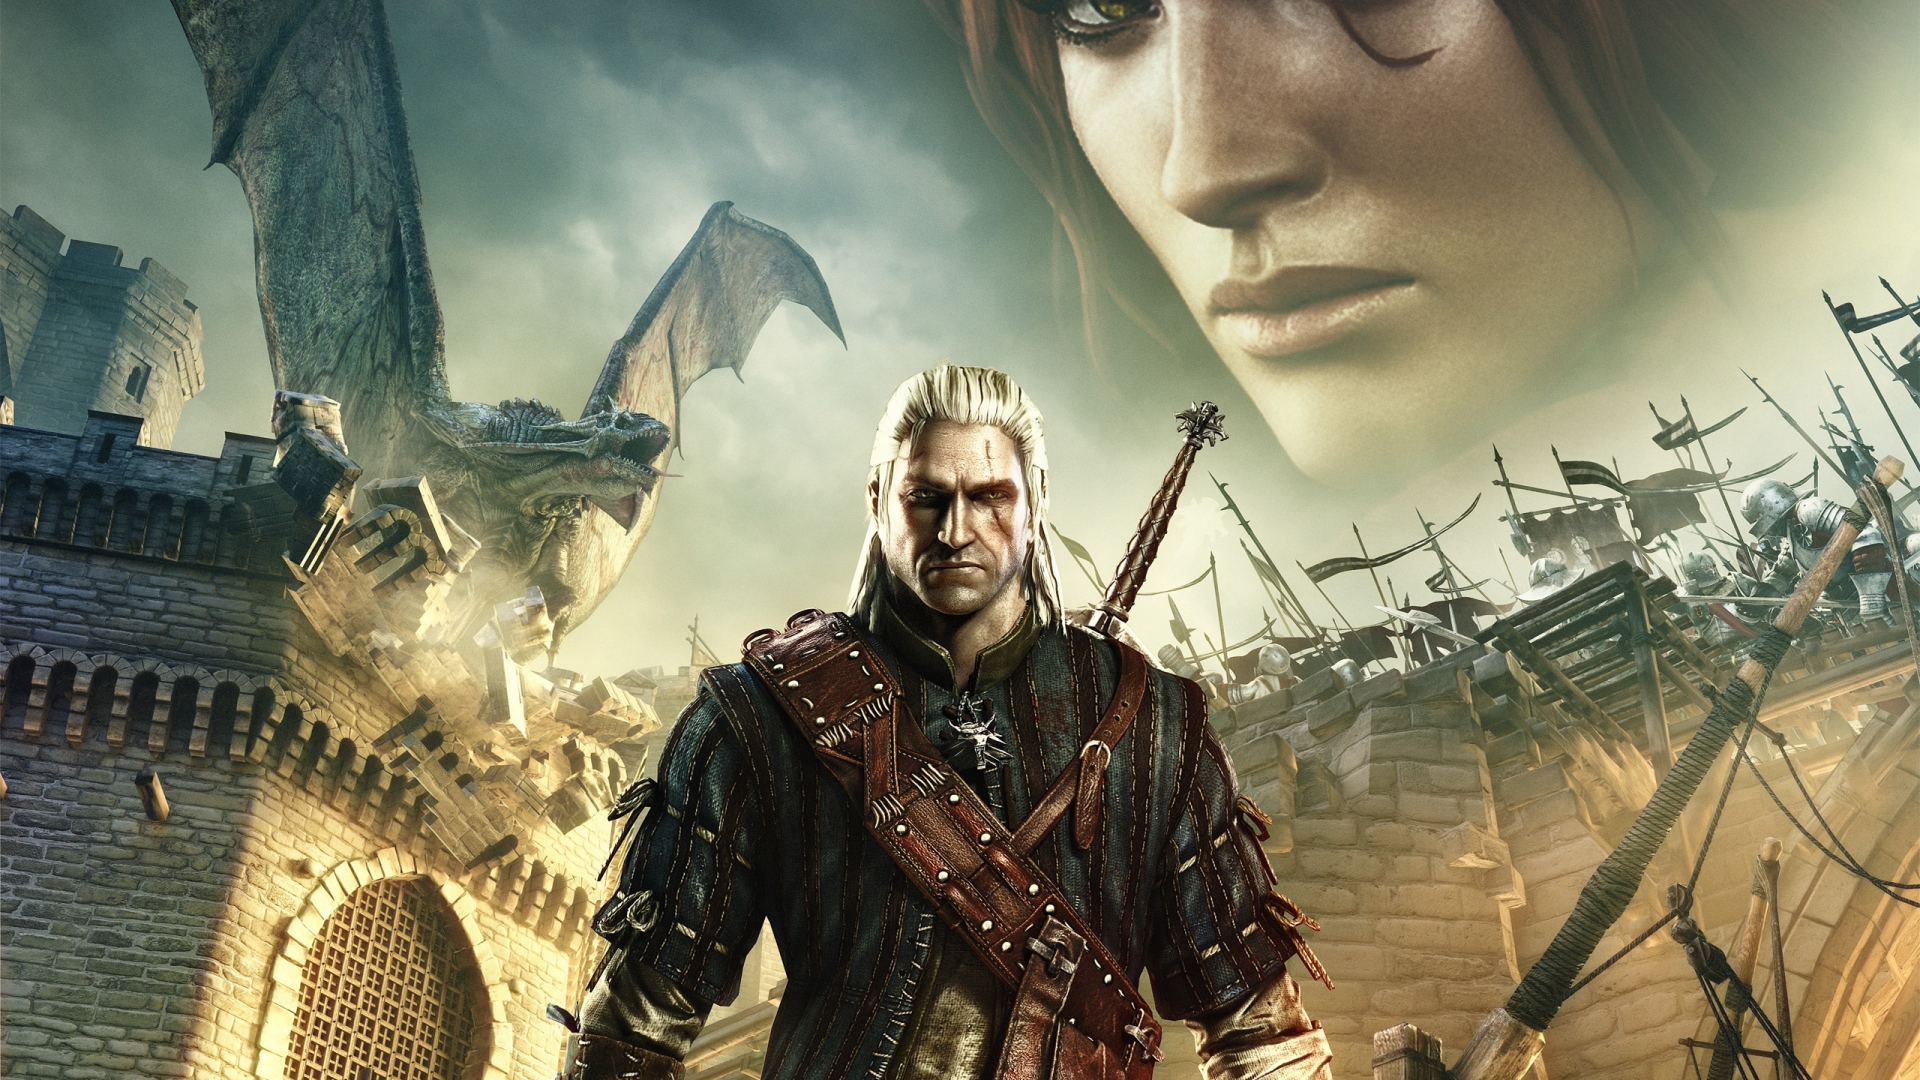 The Witcher 2 Assassins of Kings Cool for 1920 x 1080 HDTV 1080p resolution